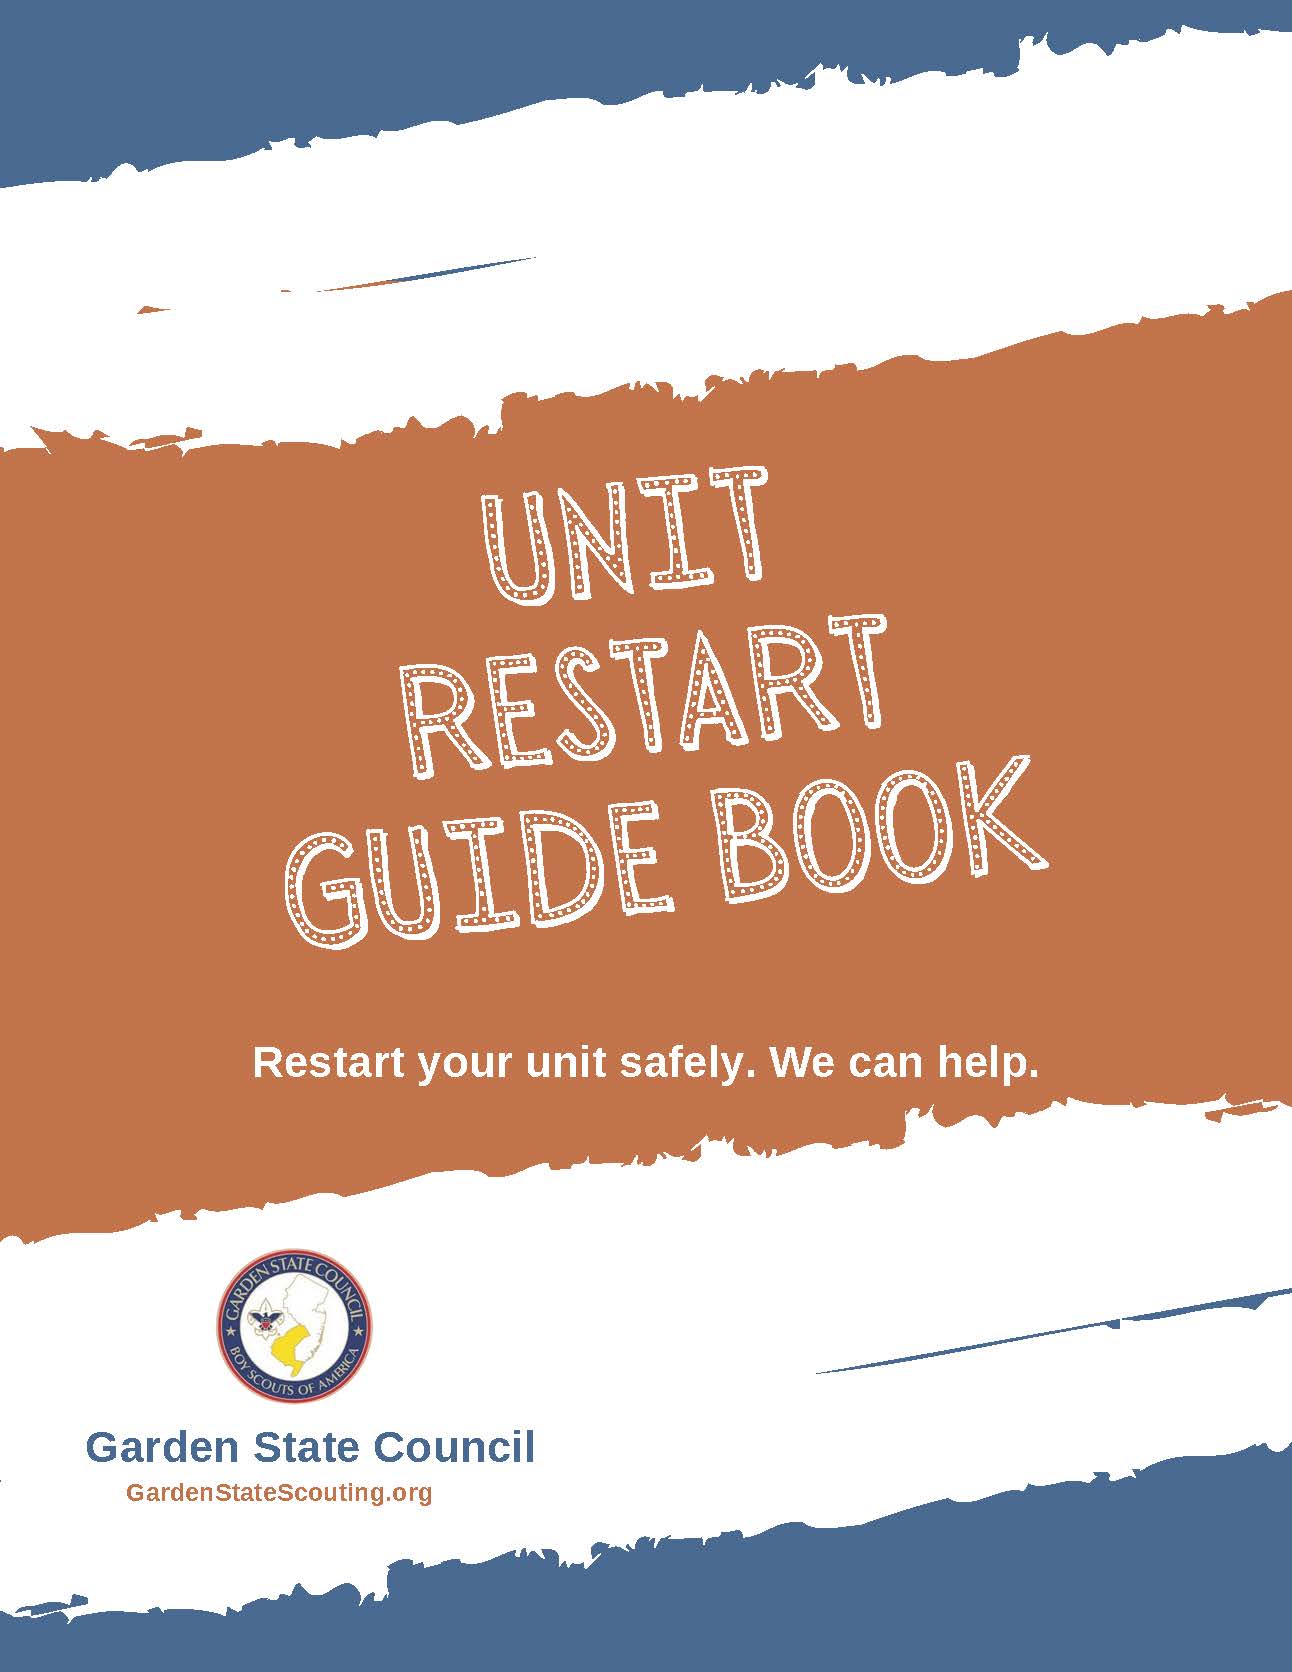 The Garden State Council Unit Restart Guide Book is a PDF to help units follow safety measures to protect against COVID-19.